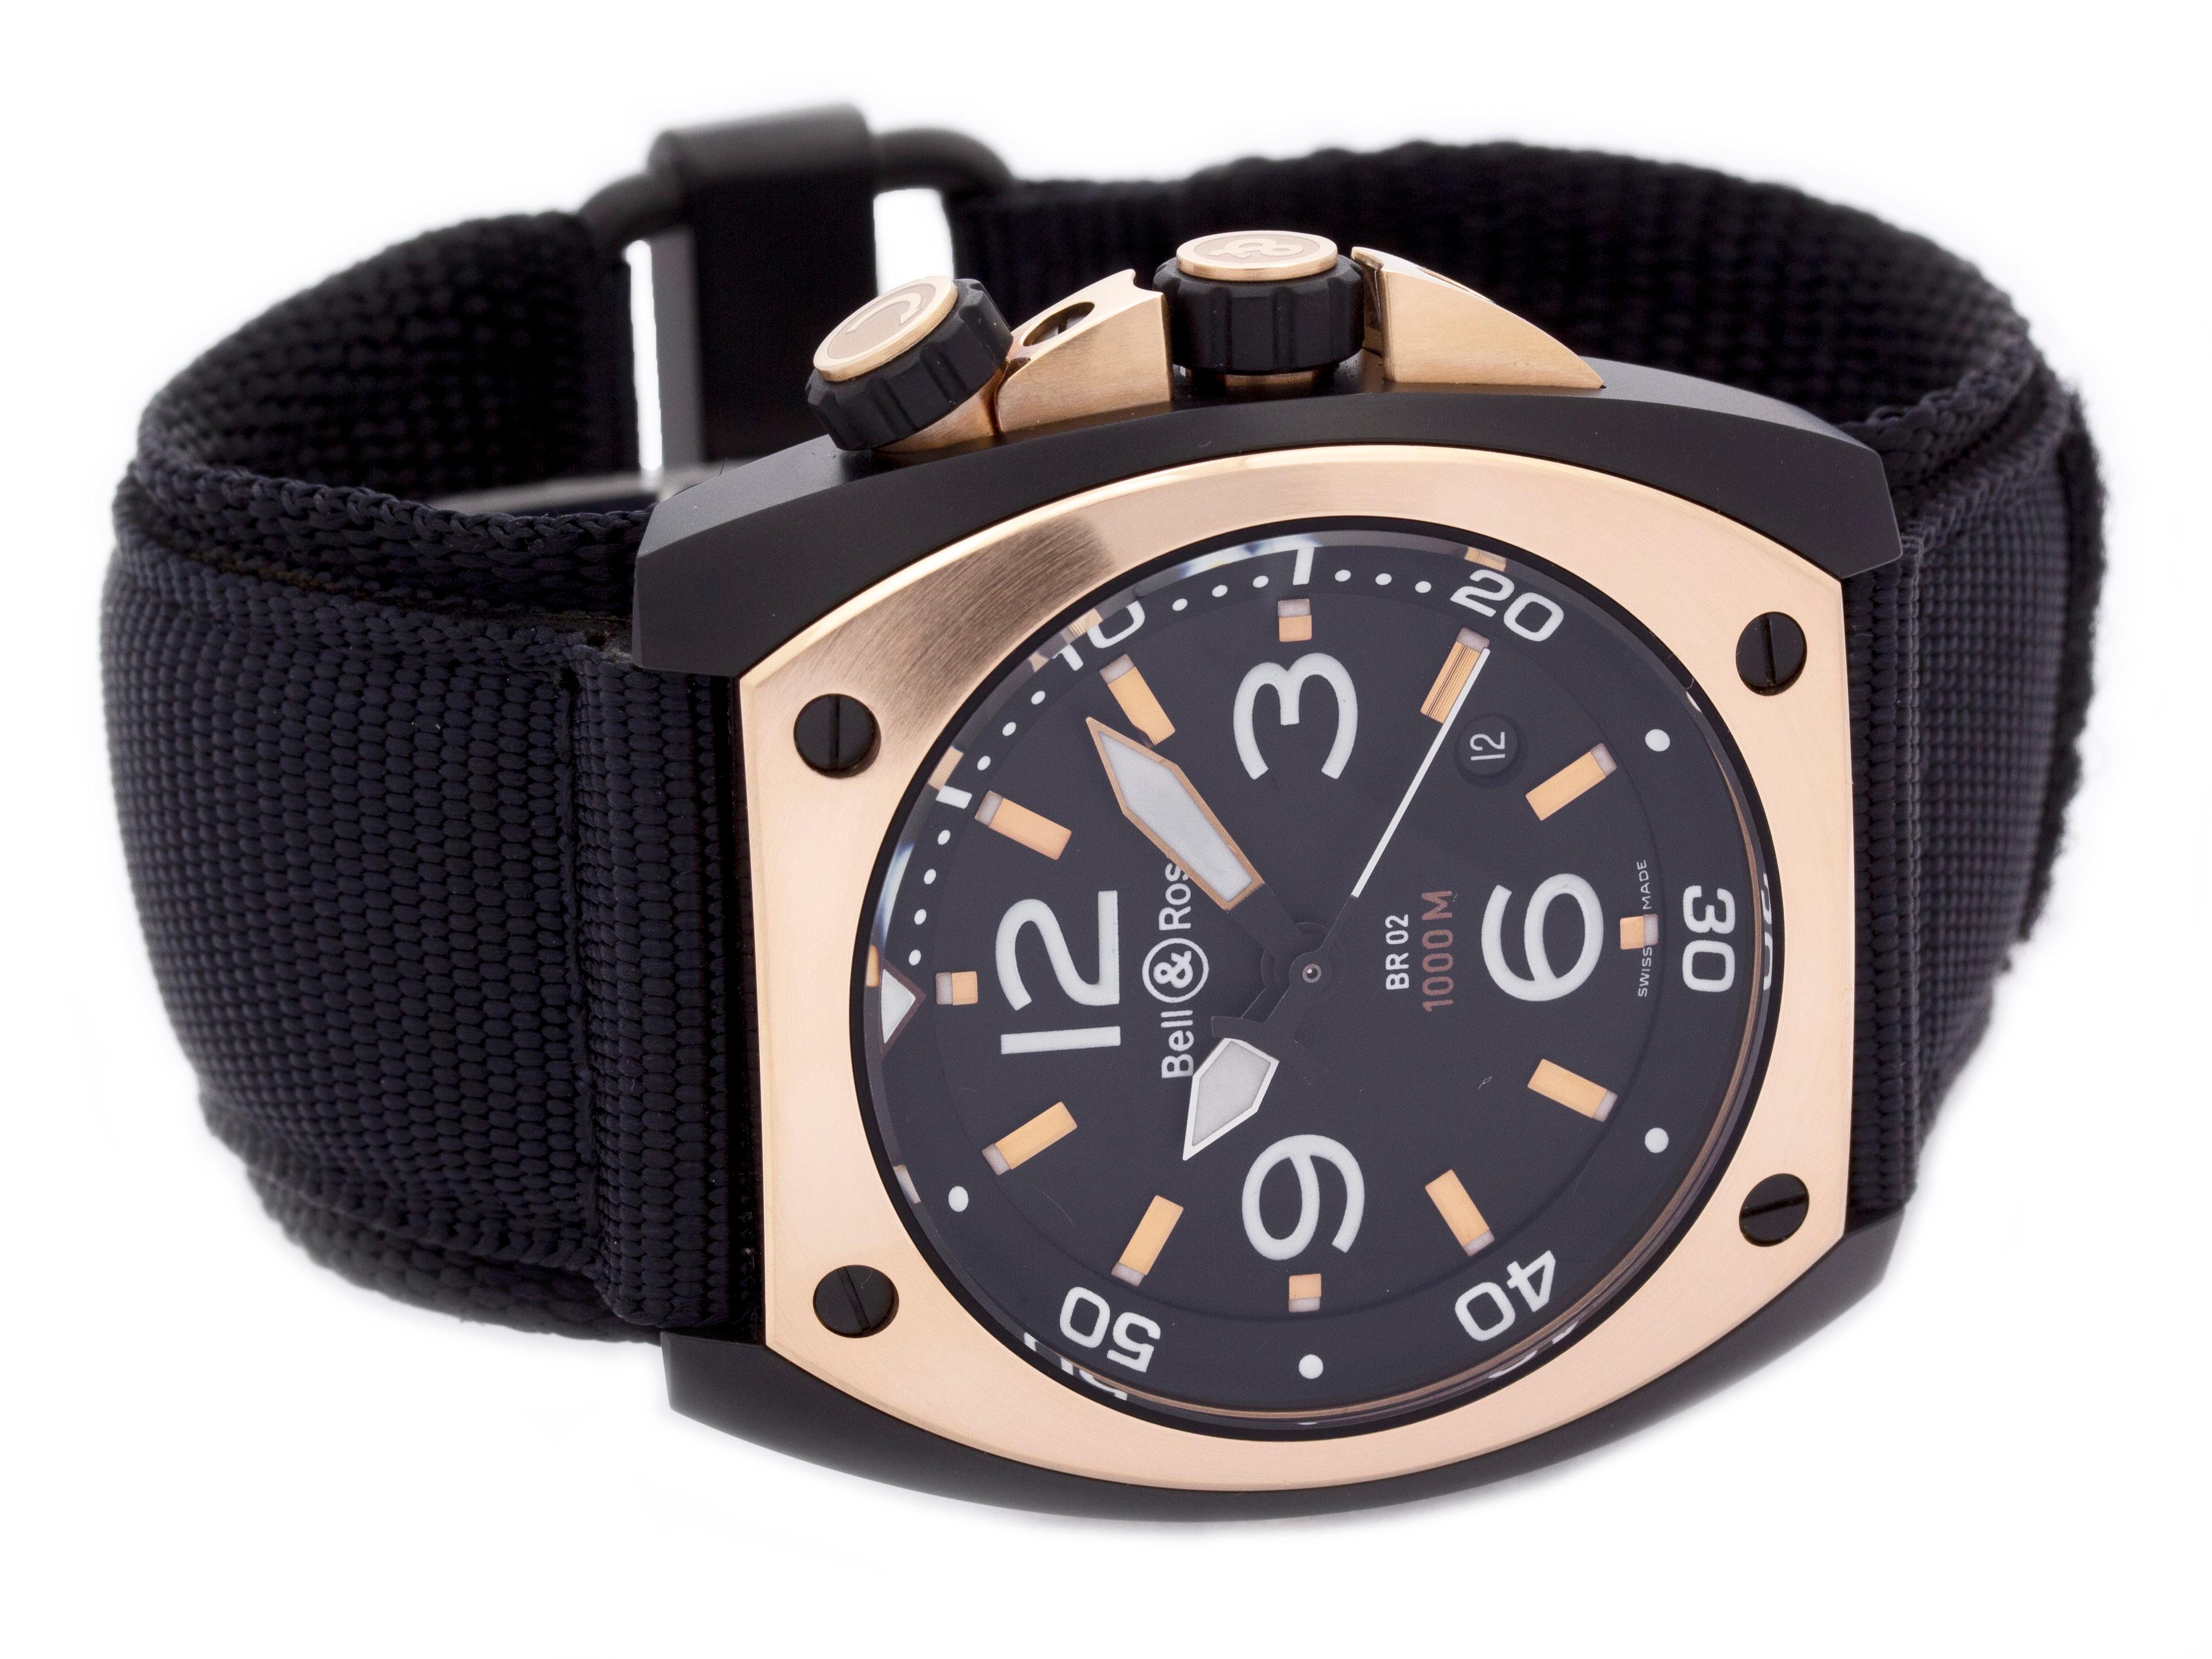 18K Rose Gold & PVD Steel Bell & Ross Marine 92 BR02-PINKGOLD-CA watch, water resistance to 1000m, with date and nylon strap.

Watch	
Brand:	Bell & Ross
Series:	Marine 92
Model #:	BR02-PINKGOLD-CA
Gender:	Men’s
Condition:	Great Display Model, Faint